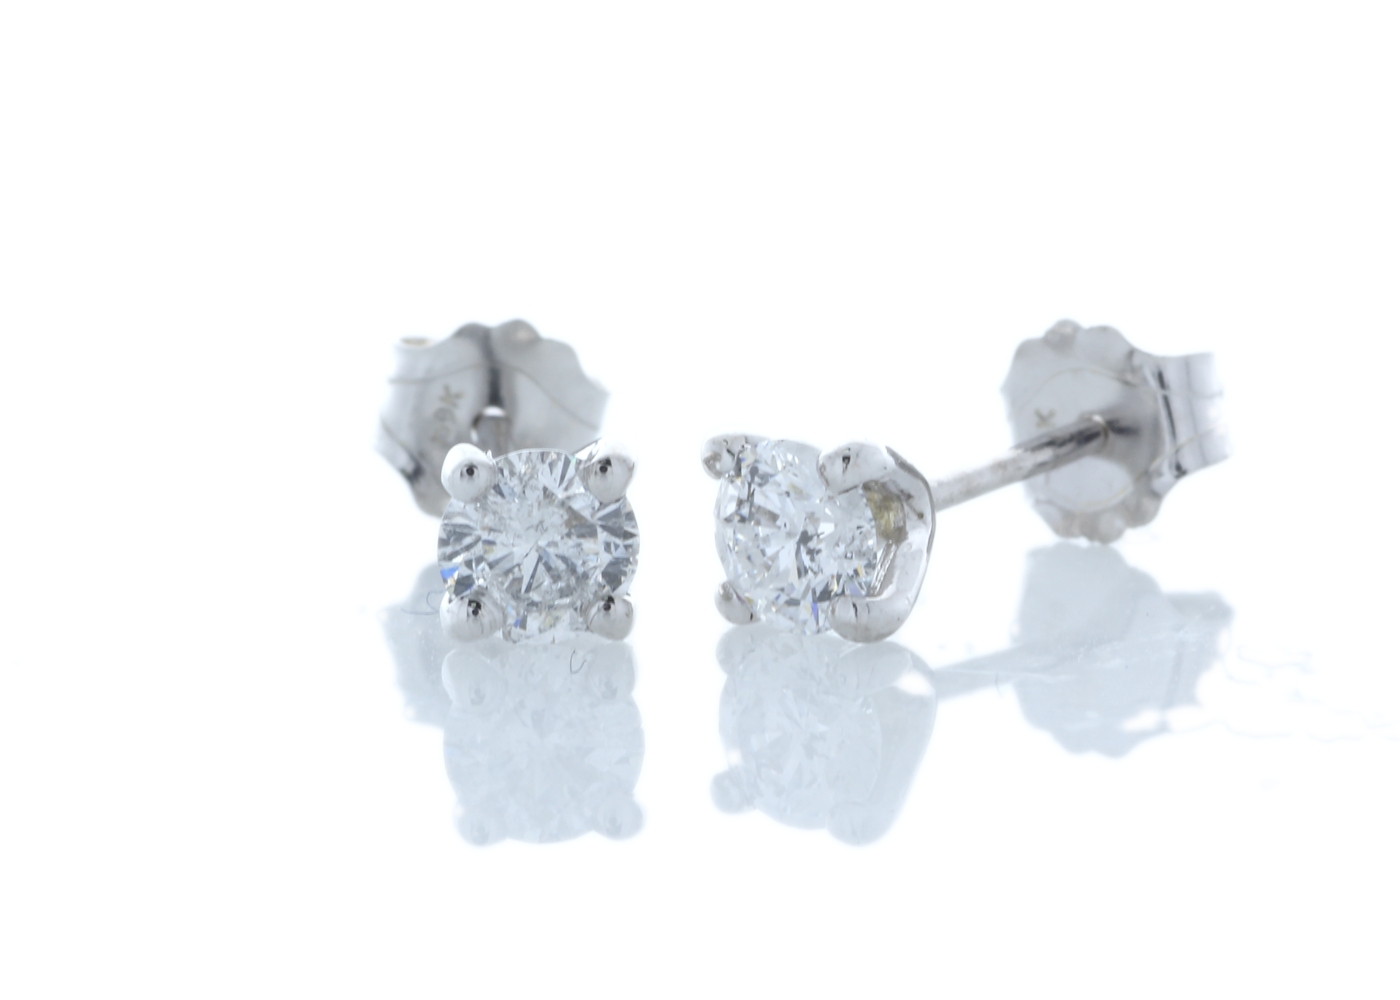 9ct White Gold Claw Set Diamond Earrings 0.42 Carats - Image 2 of 3